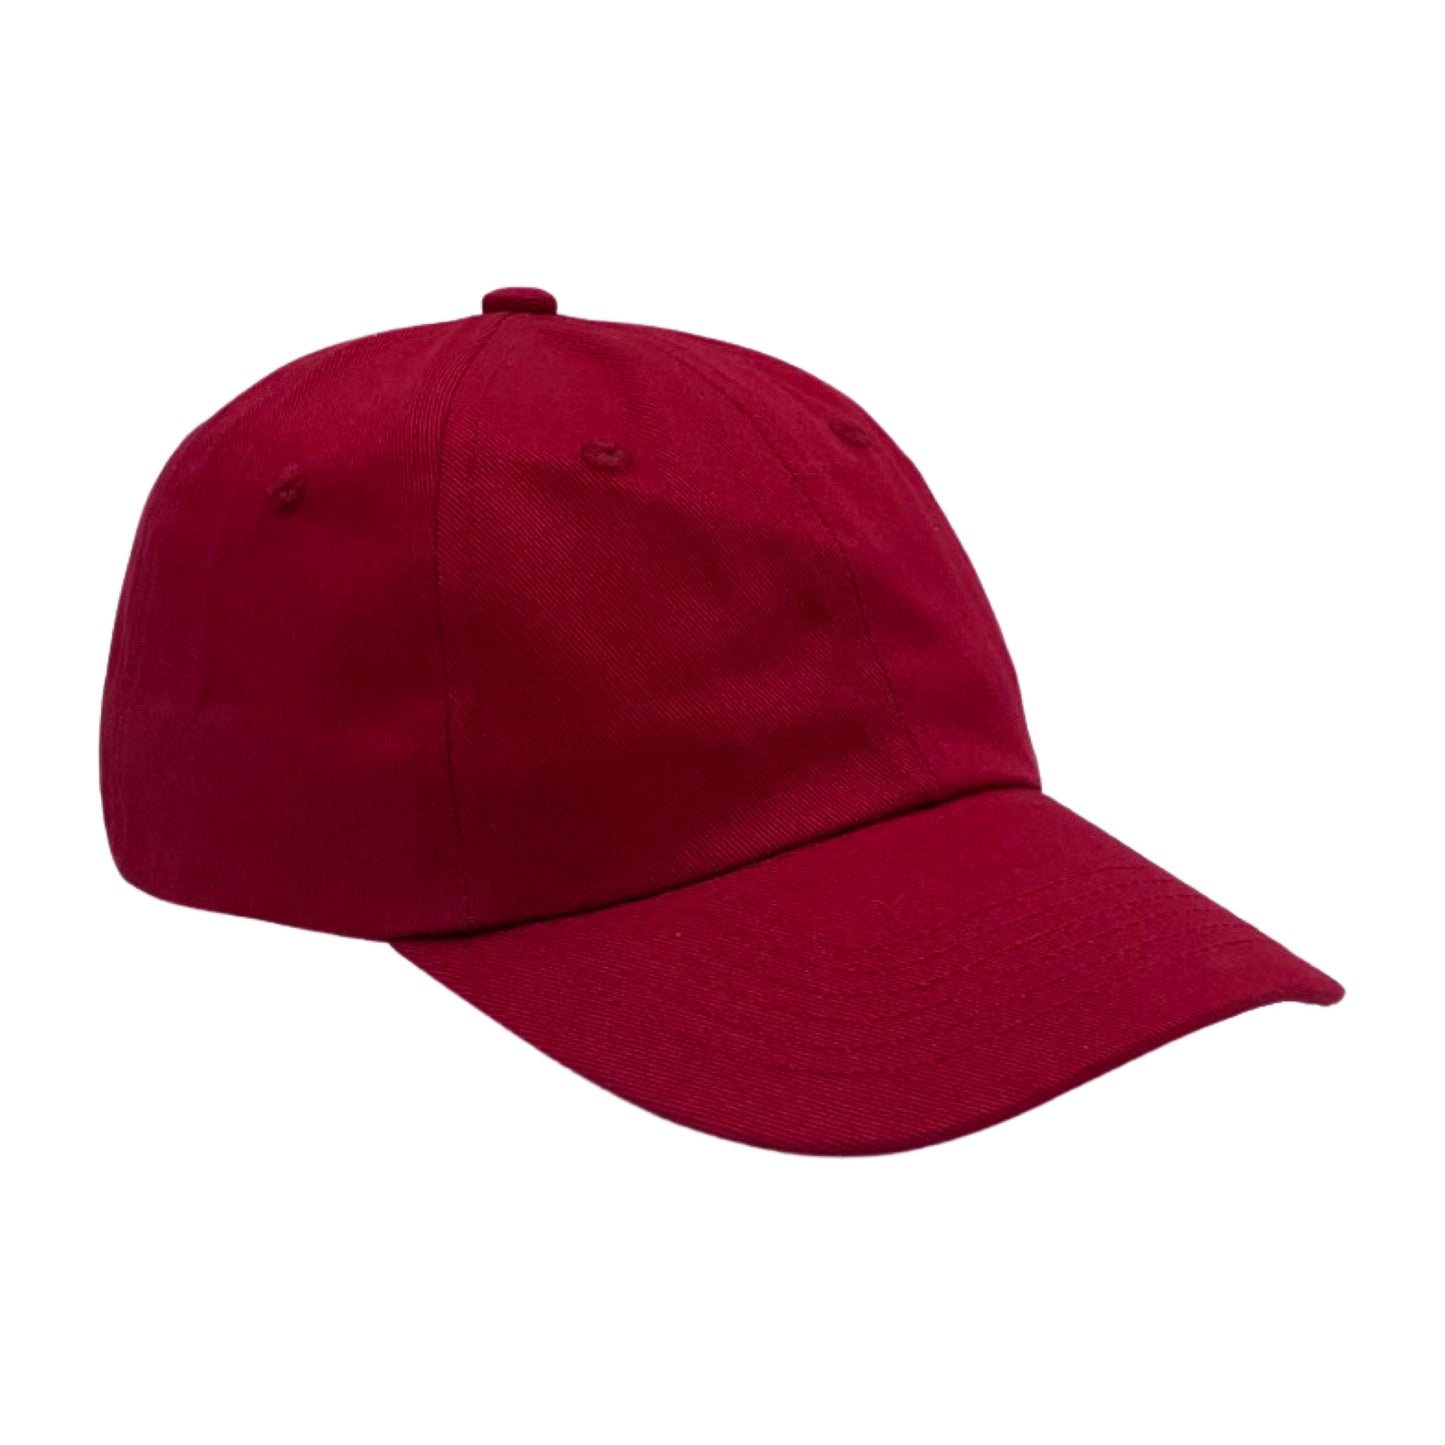 Customizable Baseball Hat in Ruby Red (Adult)